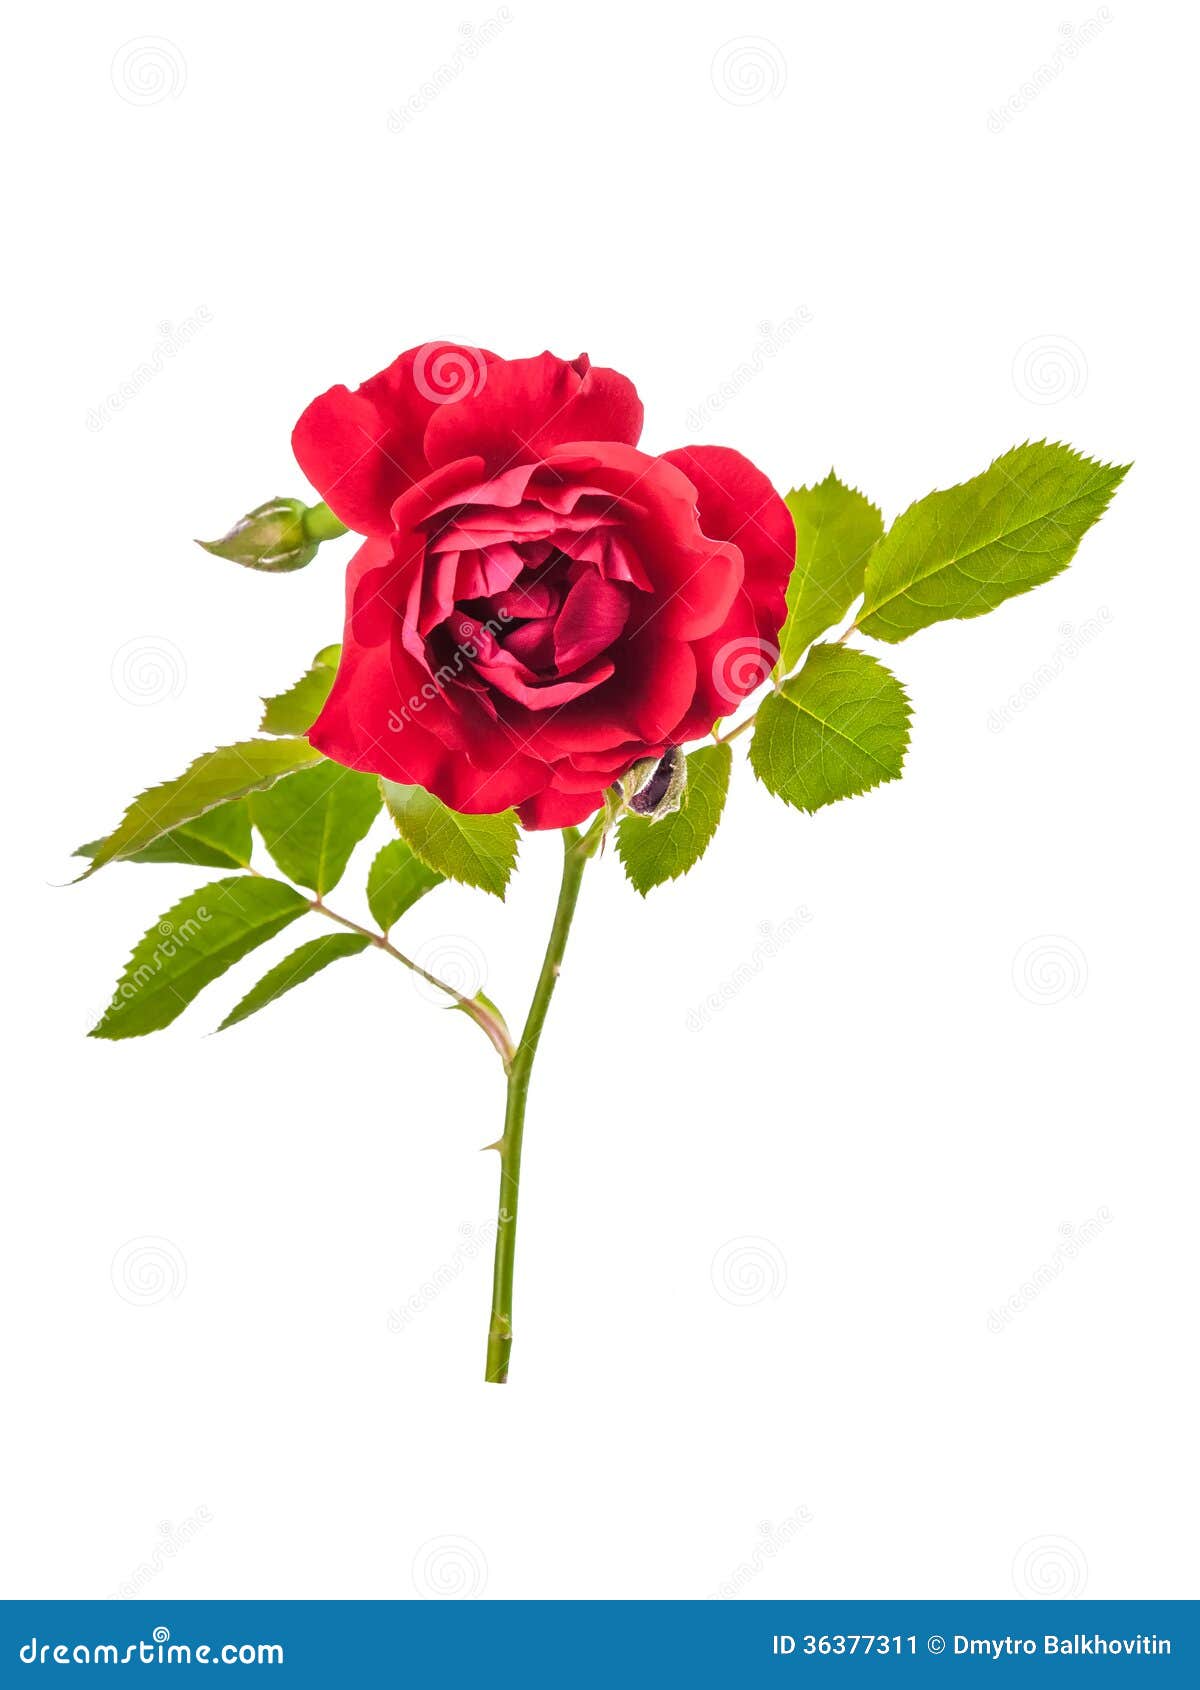 Rose red flowers stock image. Image of color, focus, fragility - 36377311